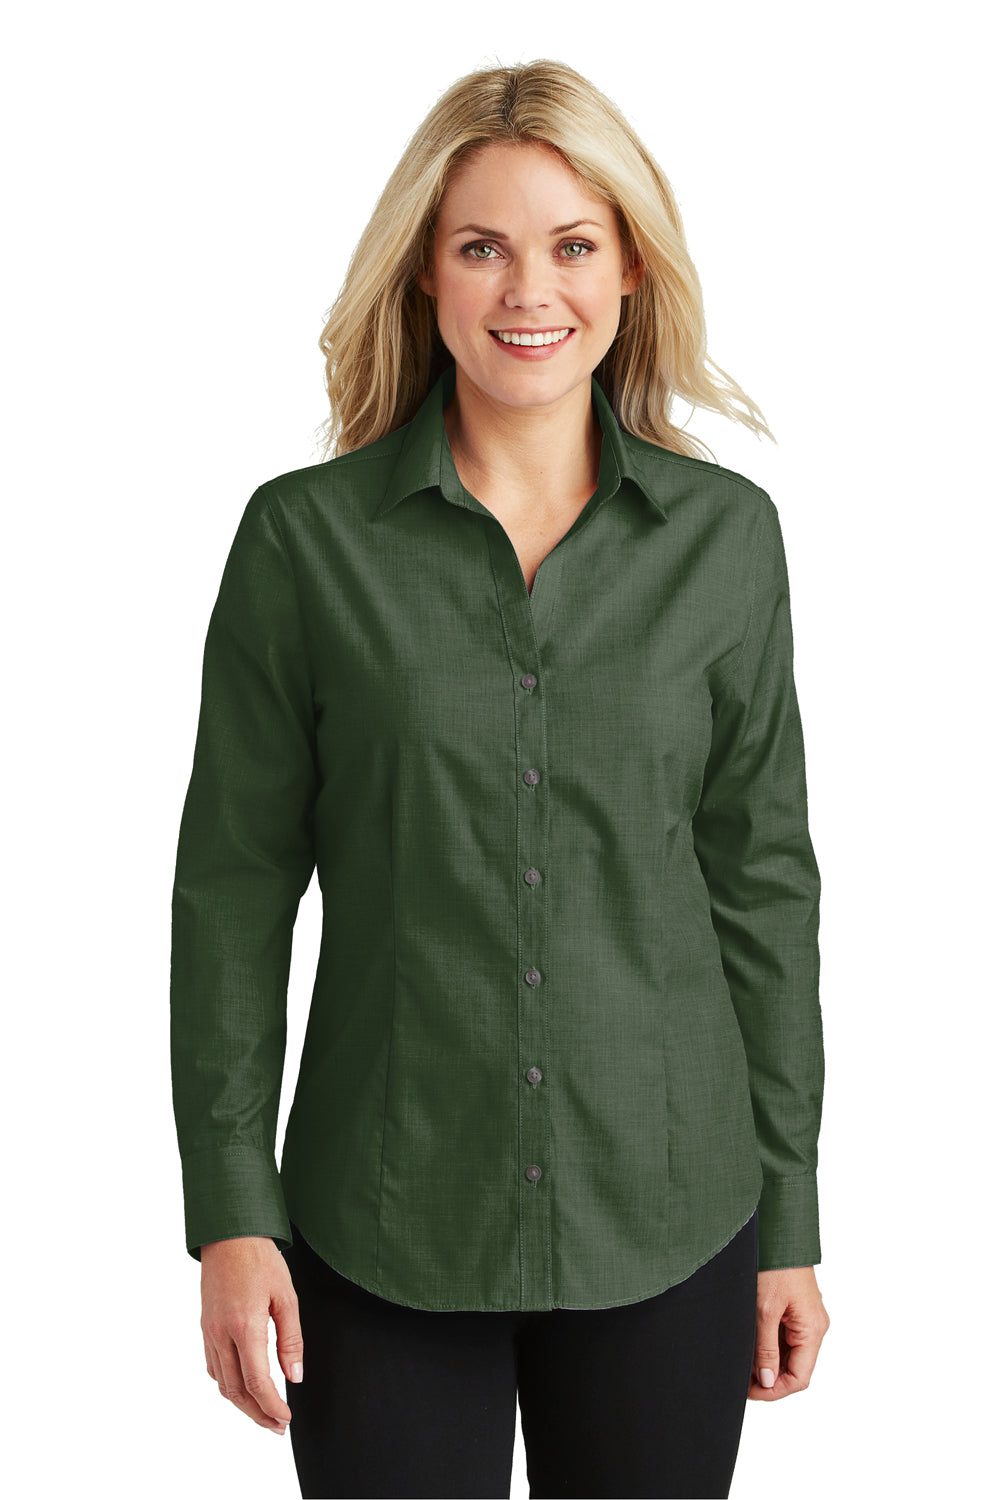 Port Authority L640 Womens Easy Care Wrinkle Resistant Long Sleeve Button Down Shirt Dark Cactus Green Front